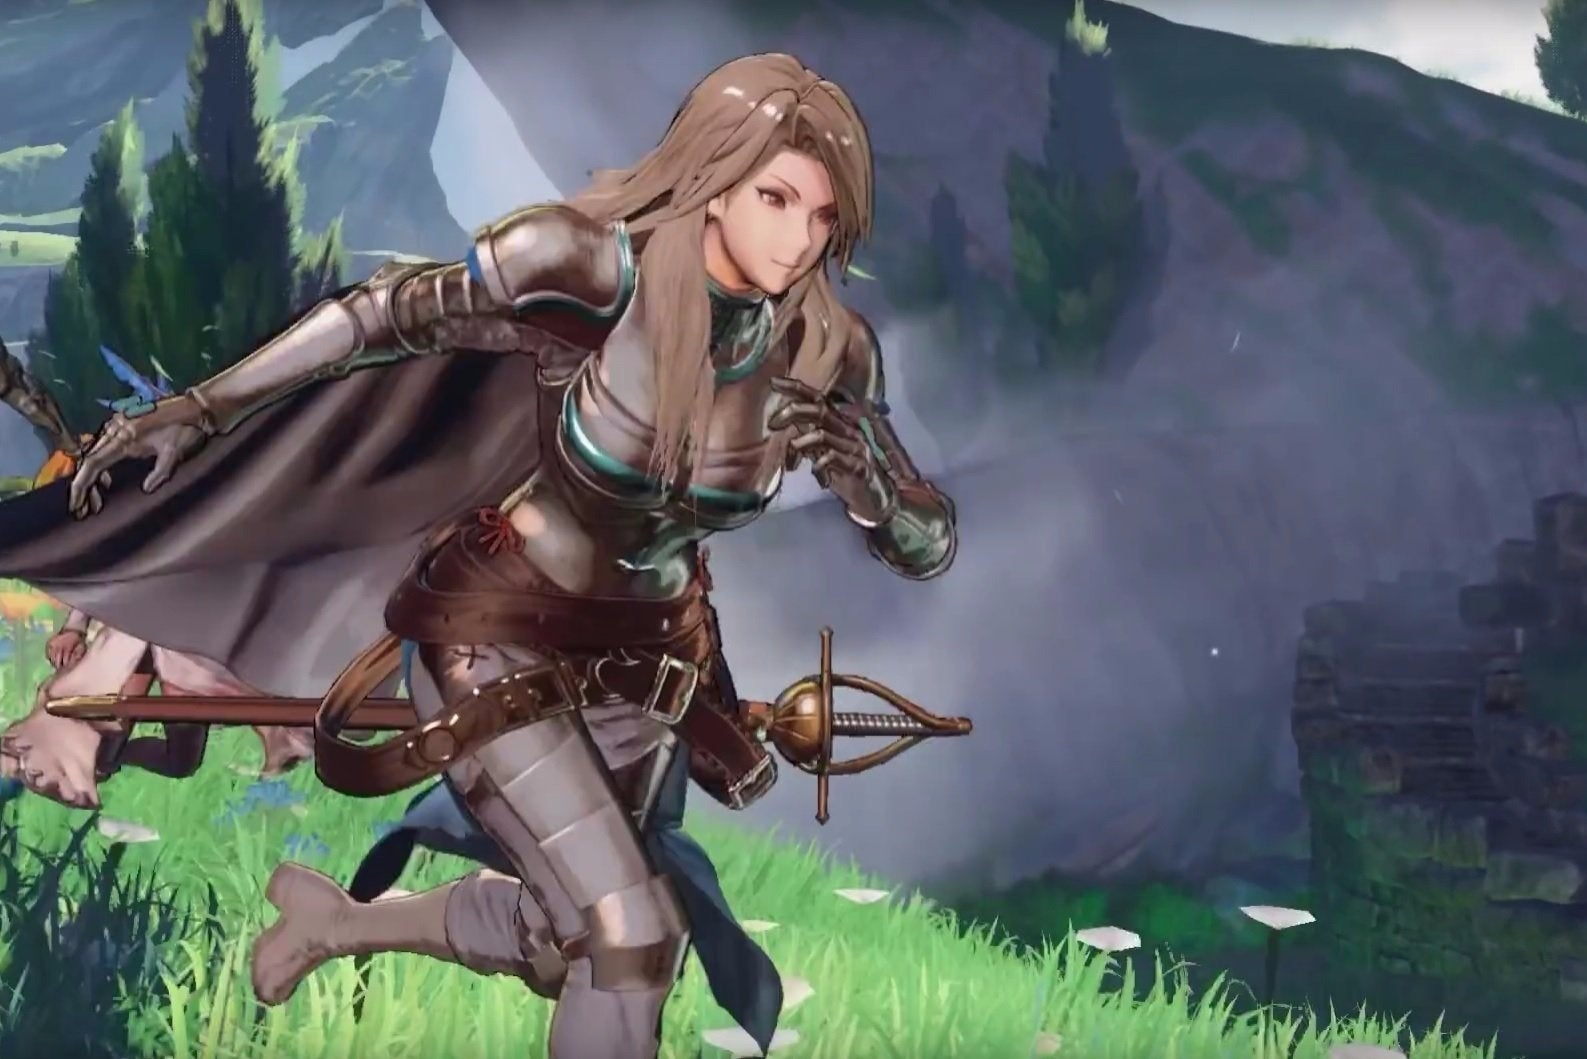 Image for Platinum's GranBlue Fantasy coming to PS4 and PSVR